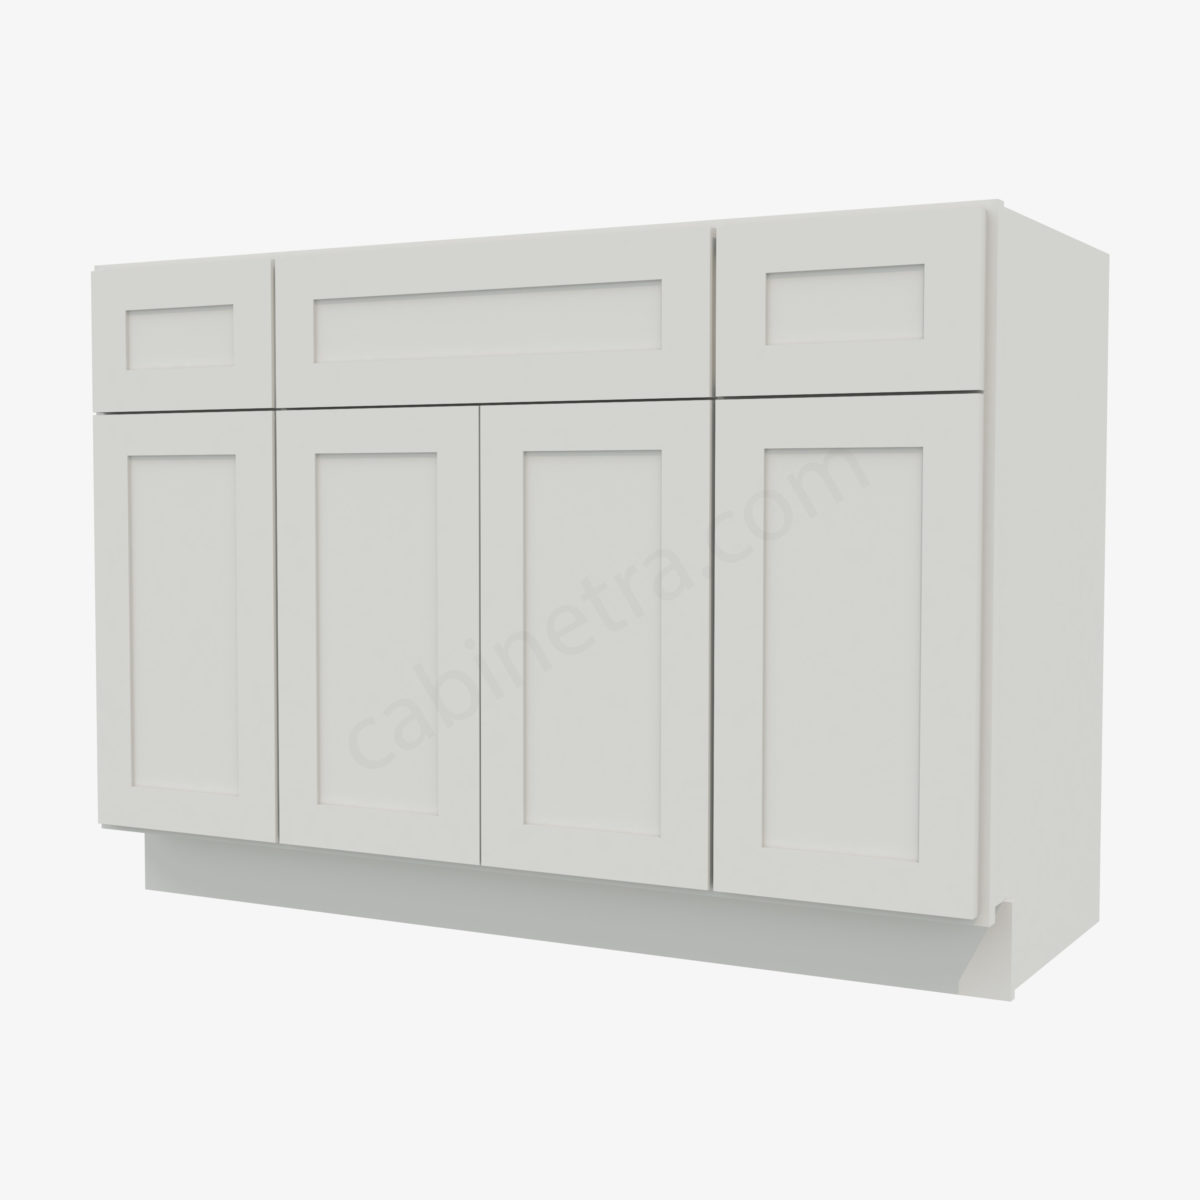 AW S4821B12D 34 0 Forevermark Ice White Shaker Cabinetra scaled